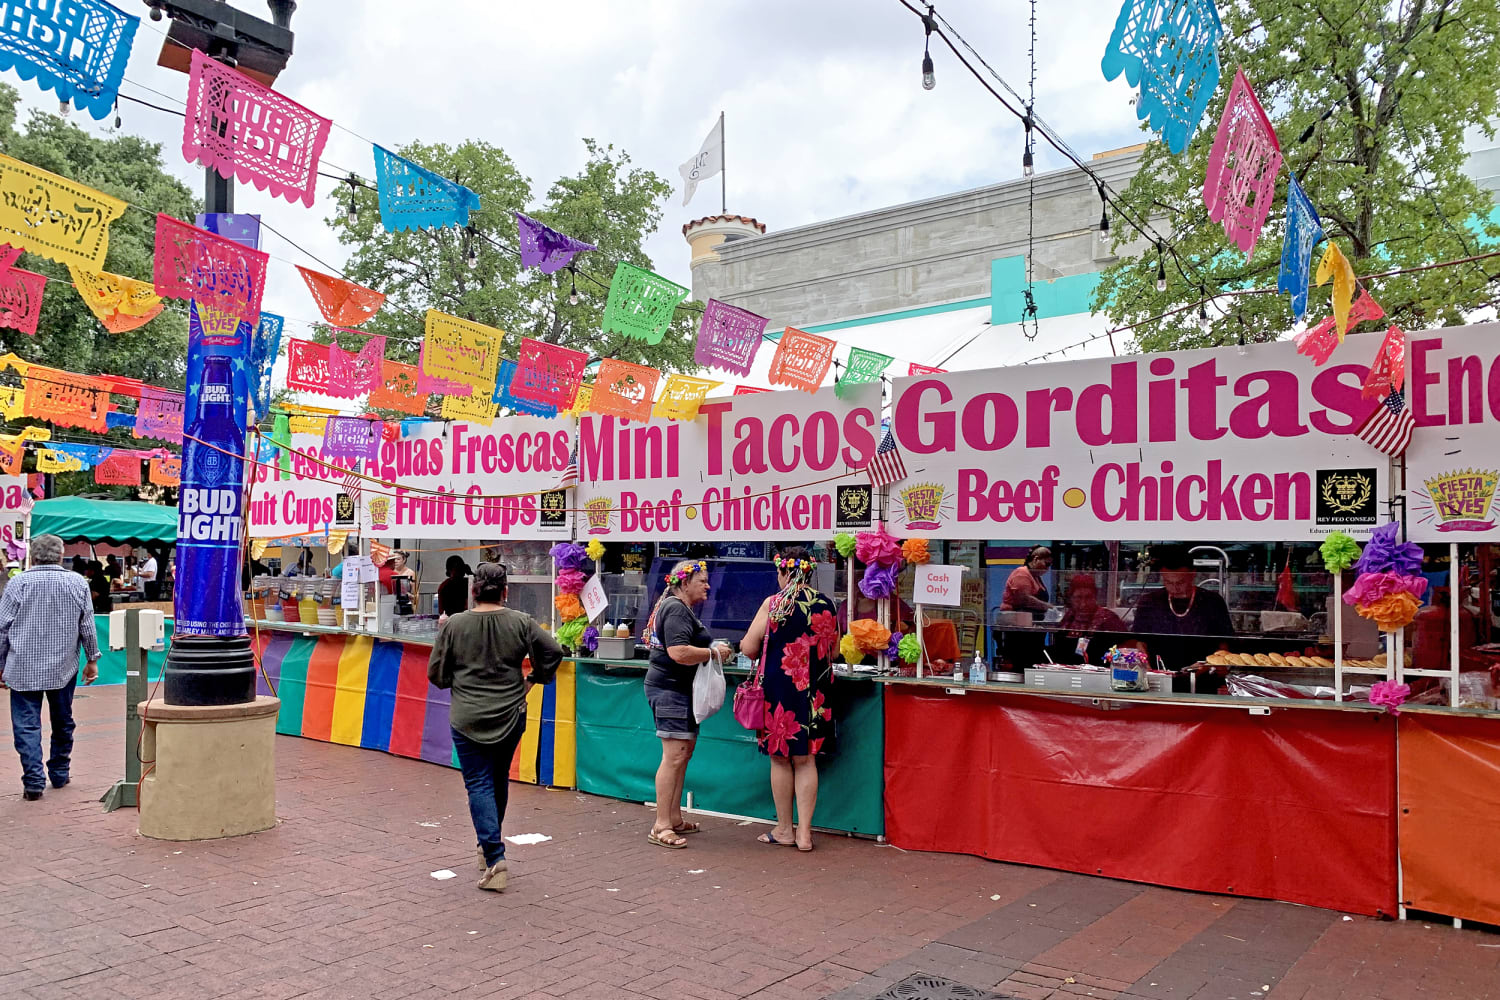 San Antonio is celebrating a smaller Fiesta to ease back to normal after Covid